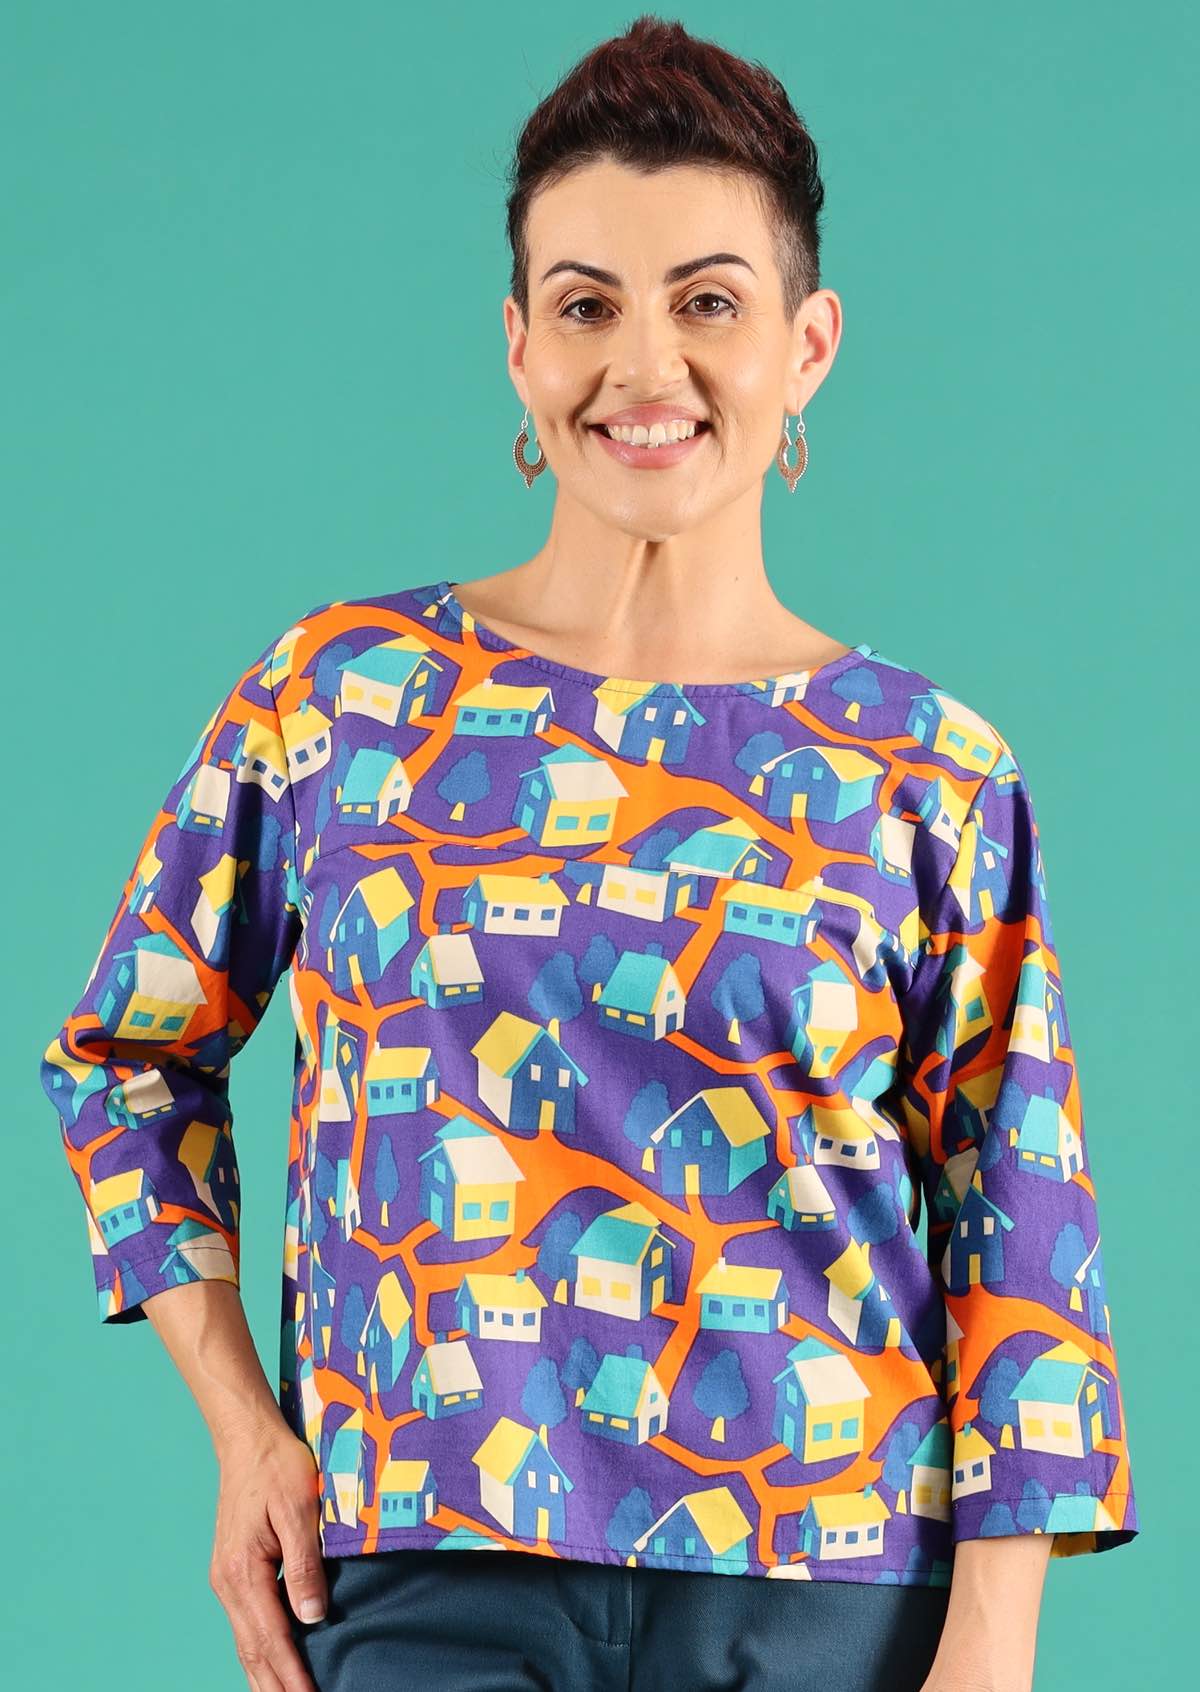 Demi Top Around the Houses orange blue yellow house print 100% cotton loose fit top with decorative buttons down the back | Karma East Australia